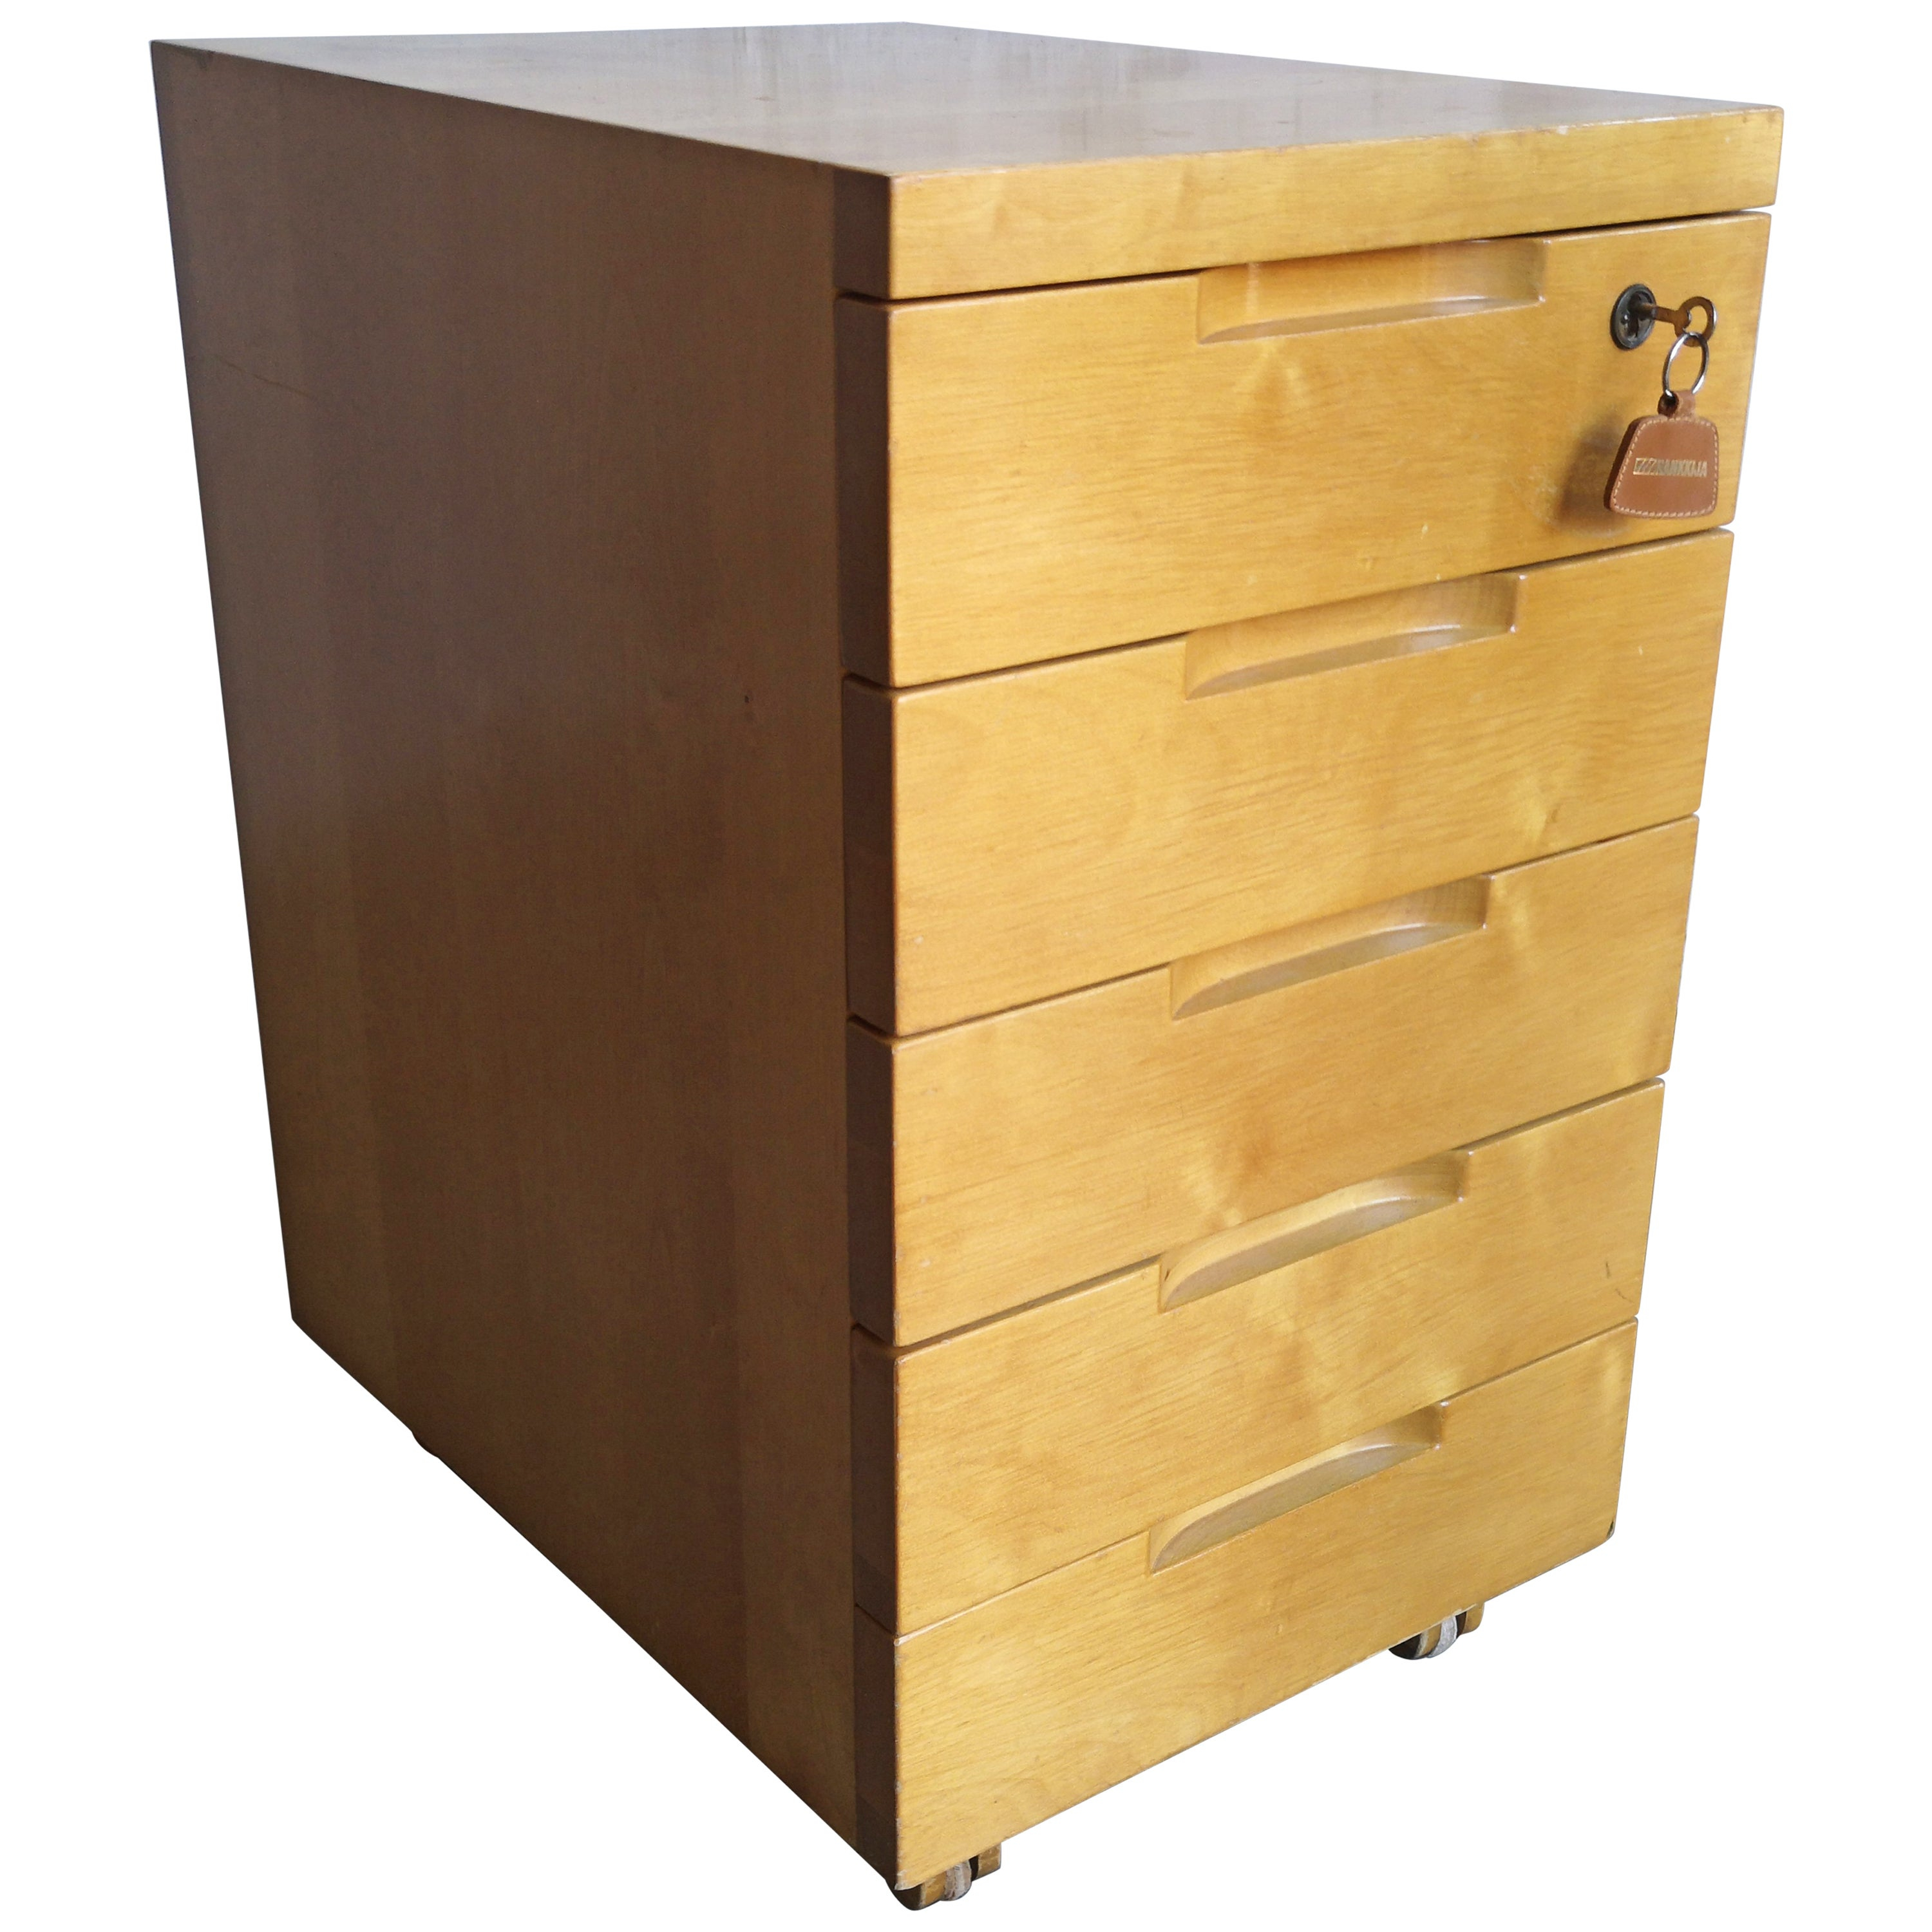 Alvar Aalto Artek 296 Lacquered Birch Chest Of Drawers Or Filing Cabinet with regard to dimensions 3000 X 3000